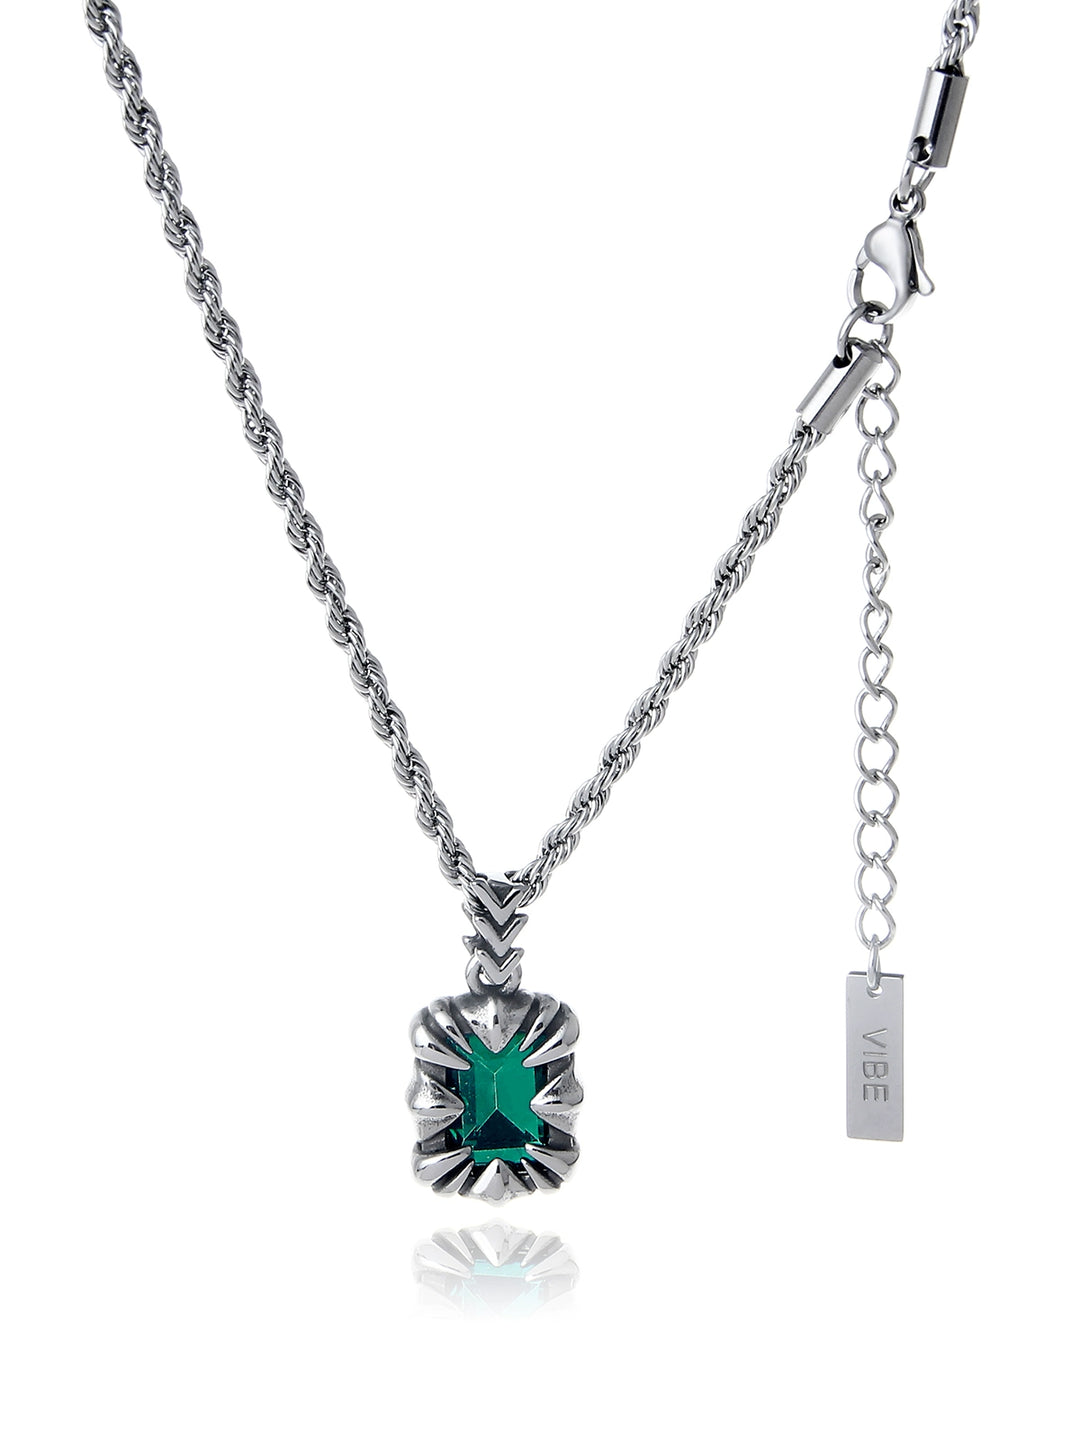 KC NO. 328 CHAIN NECKLACE WITH GREEN PENDANT |MN